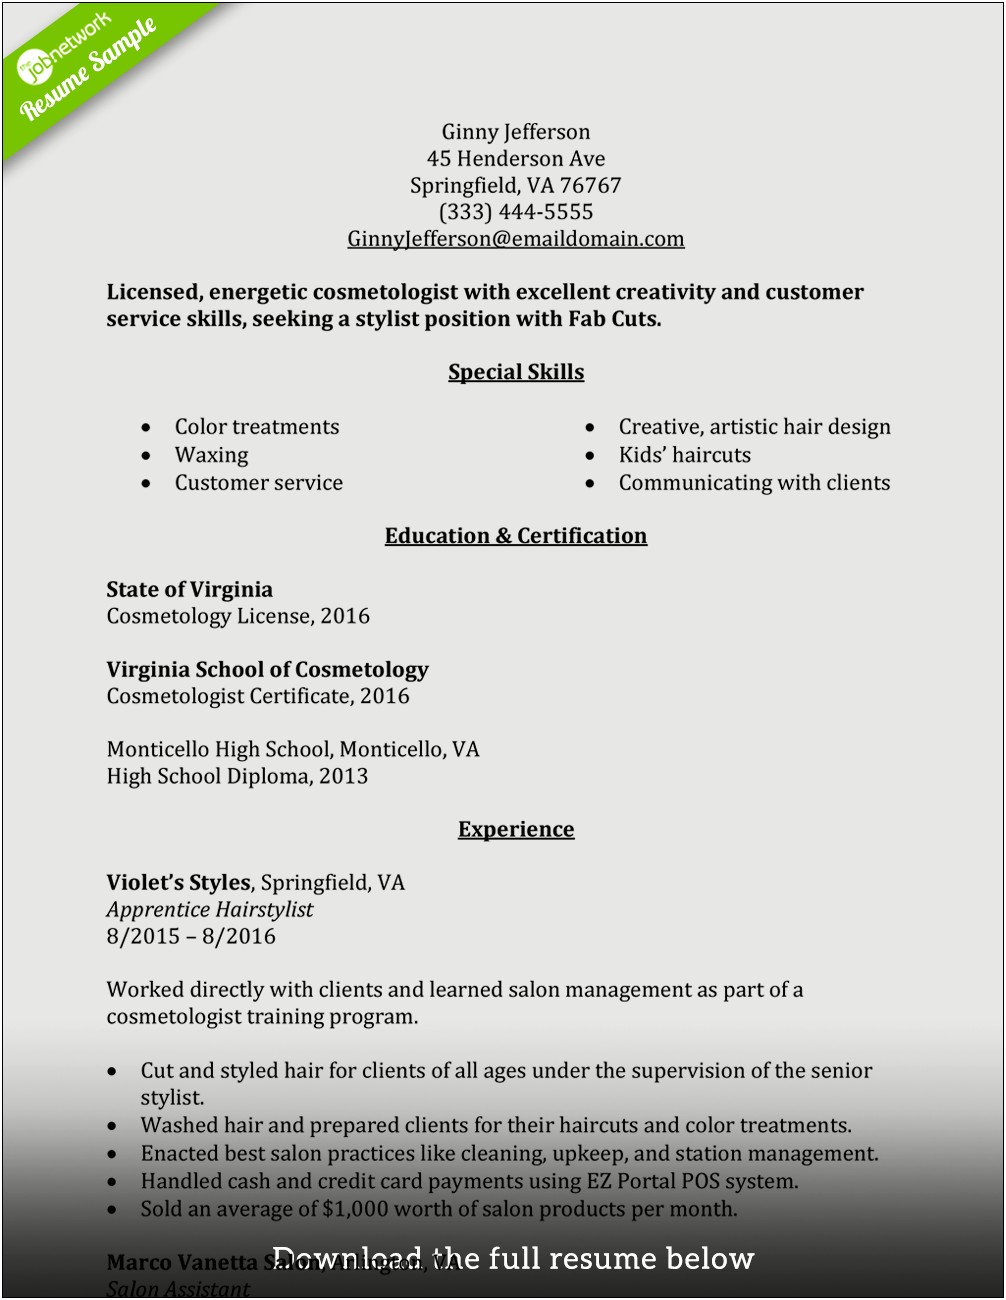 Resume Objective For Cosmetology Instructor